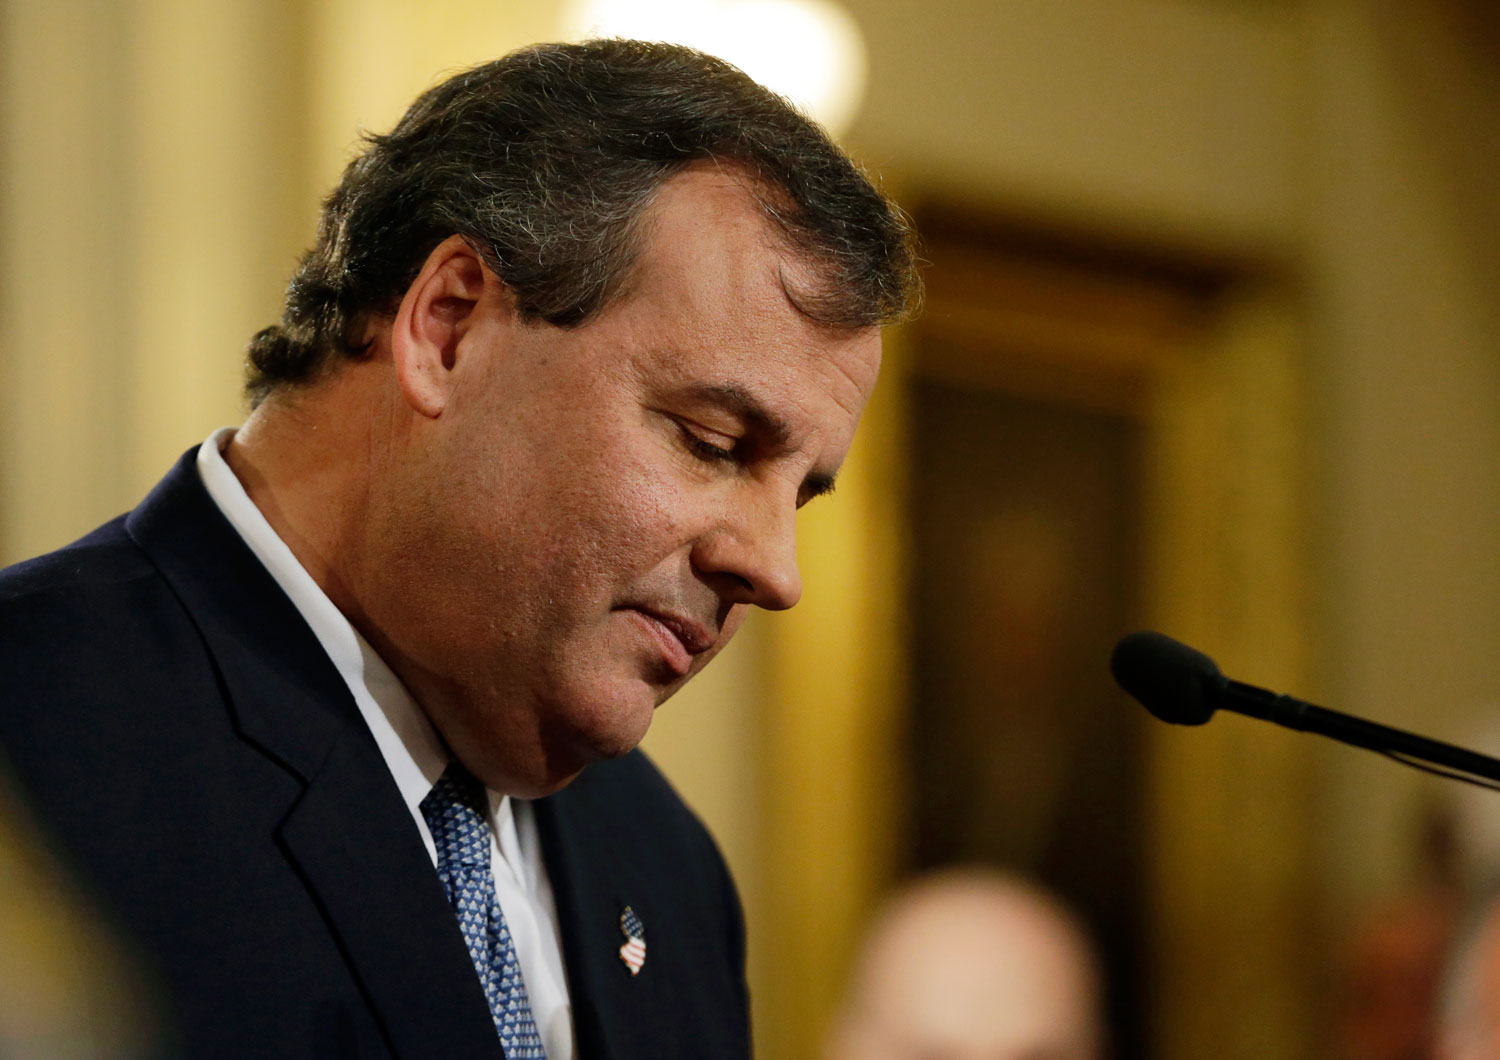 Inquiry Into Bridgegate Provides Clues That Christie Knew About the Lane Closures